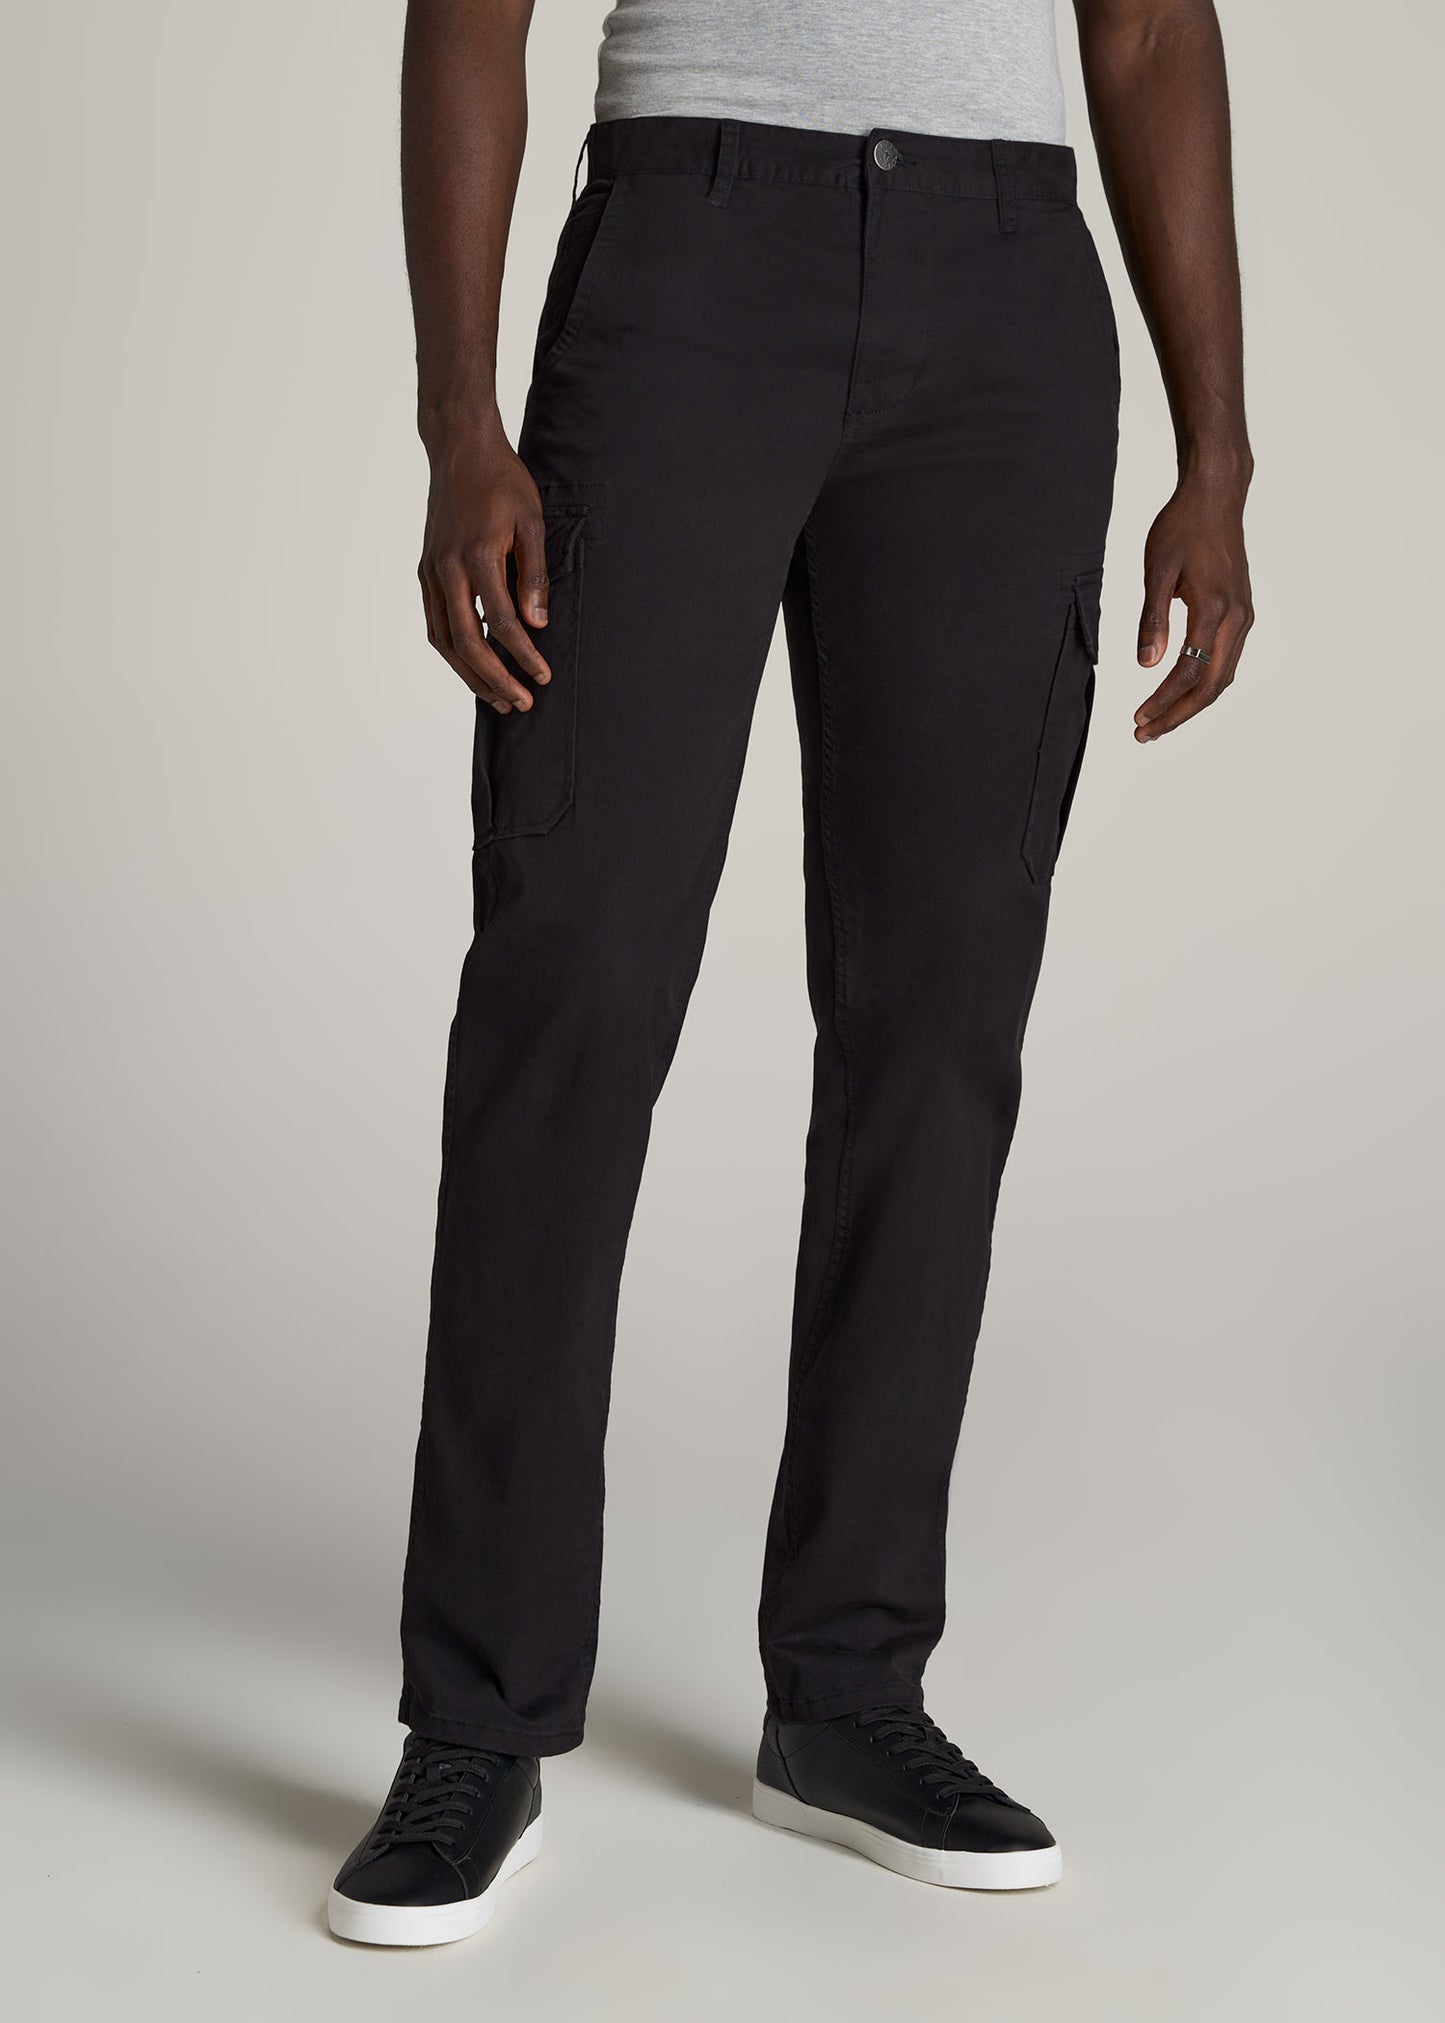 Cargos for Tall Men: Stretch Twill Cargo Black Pants | American Tall